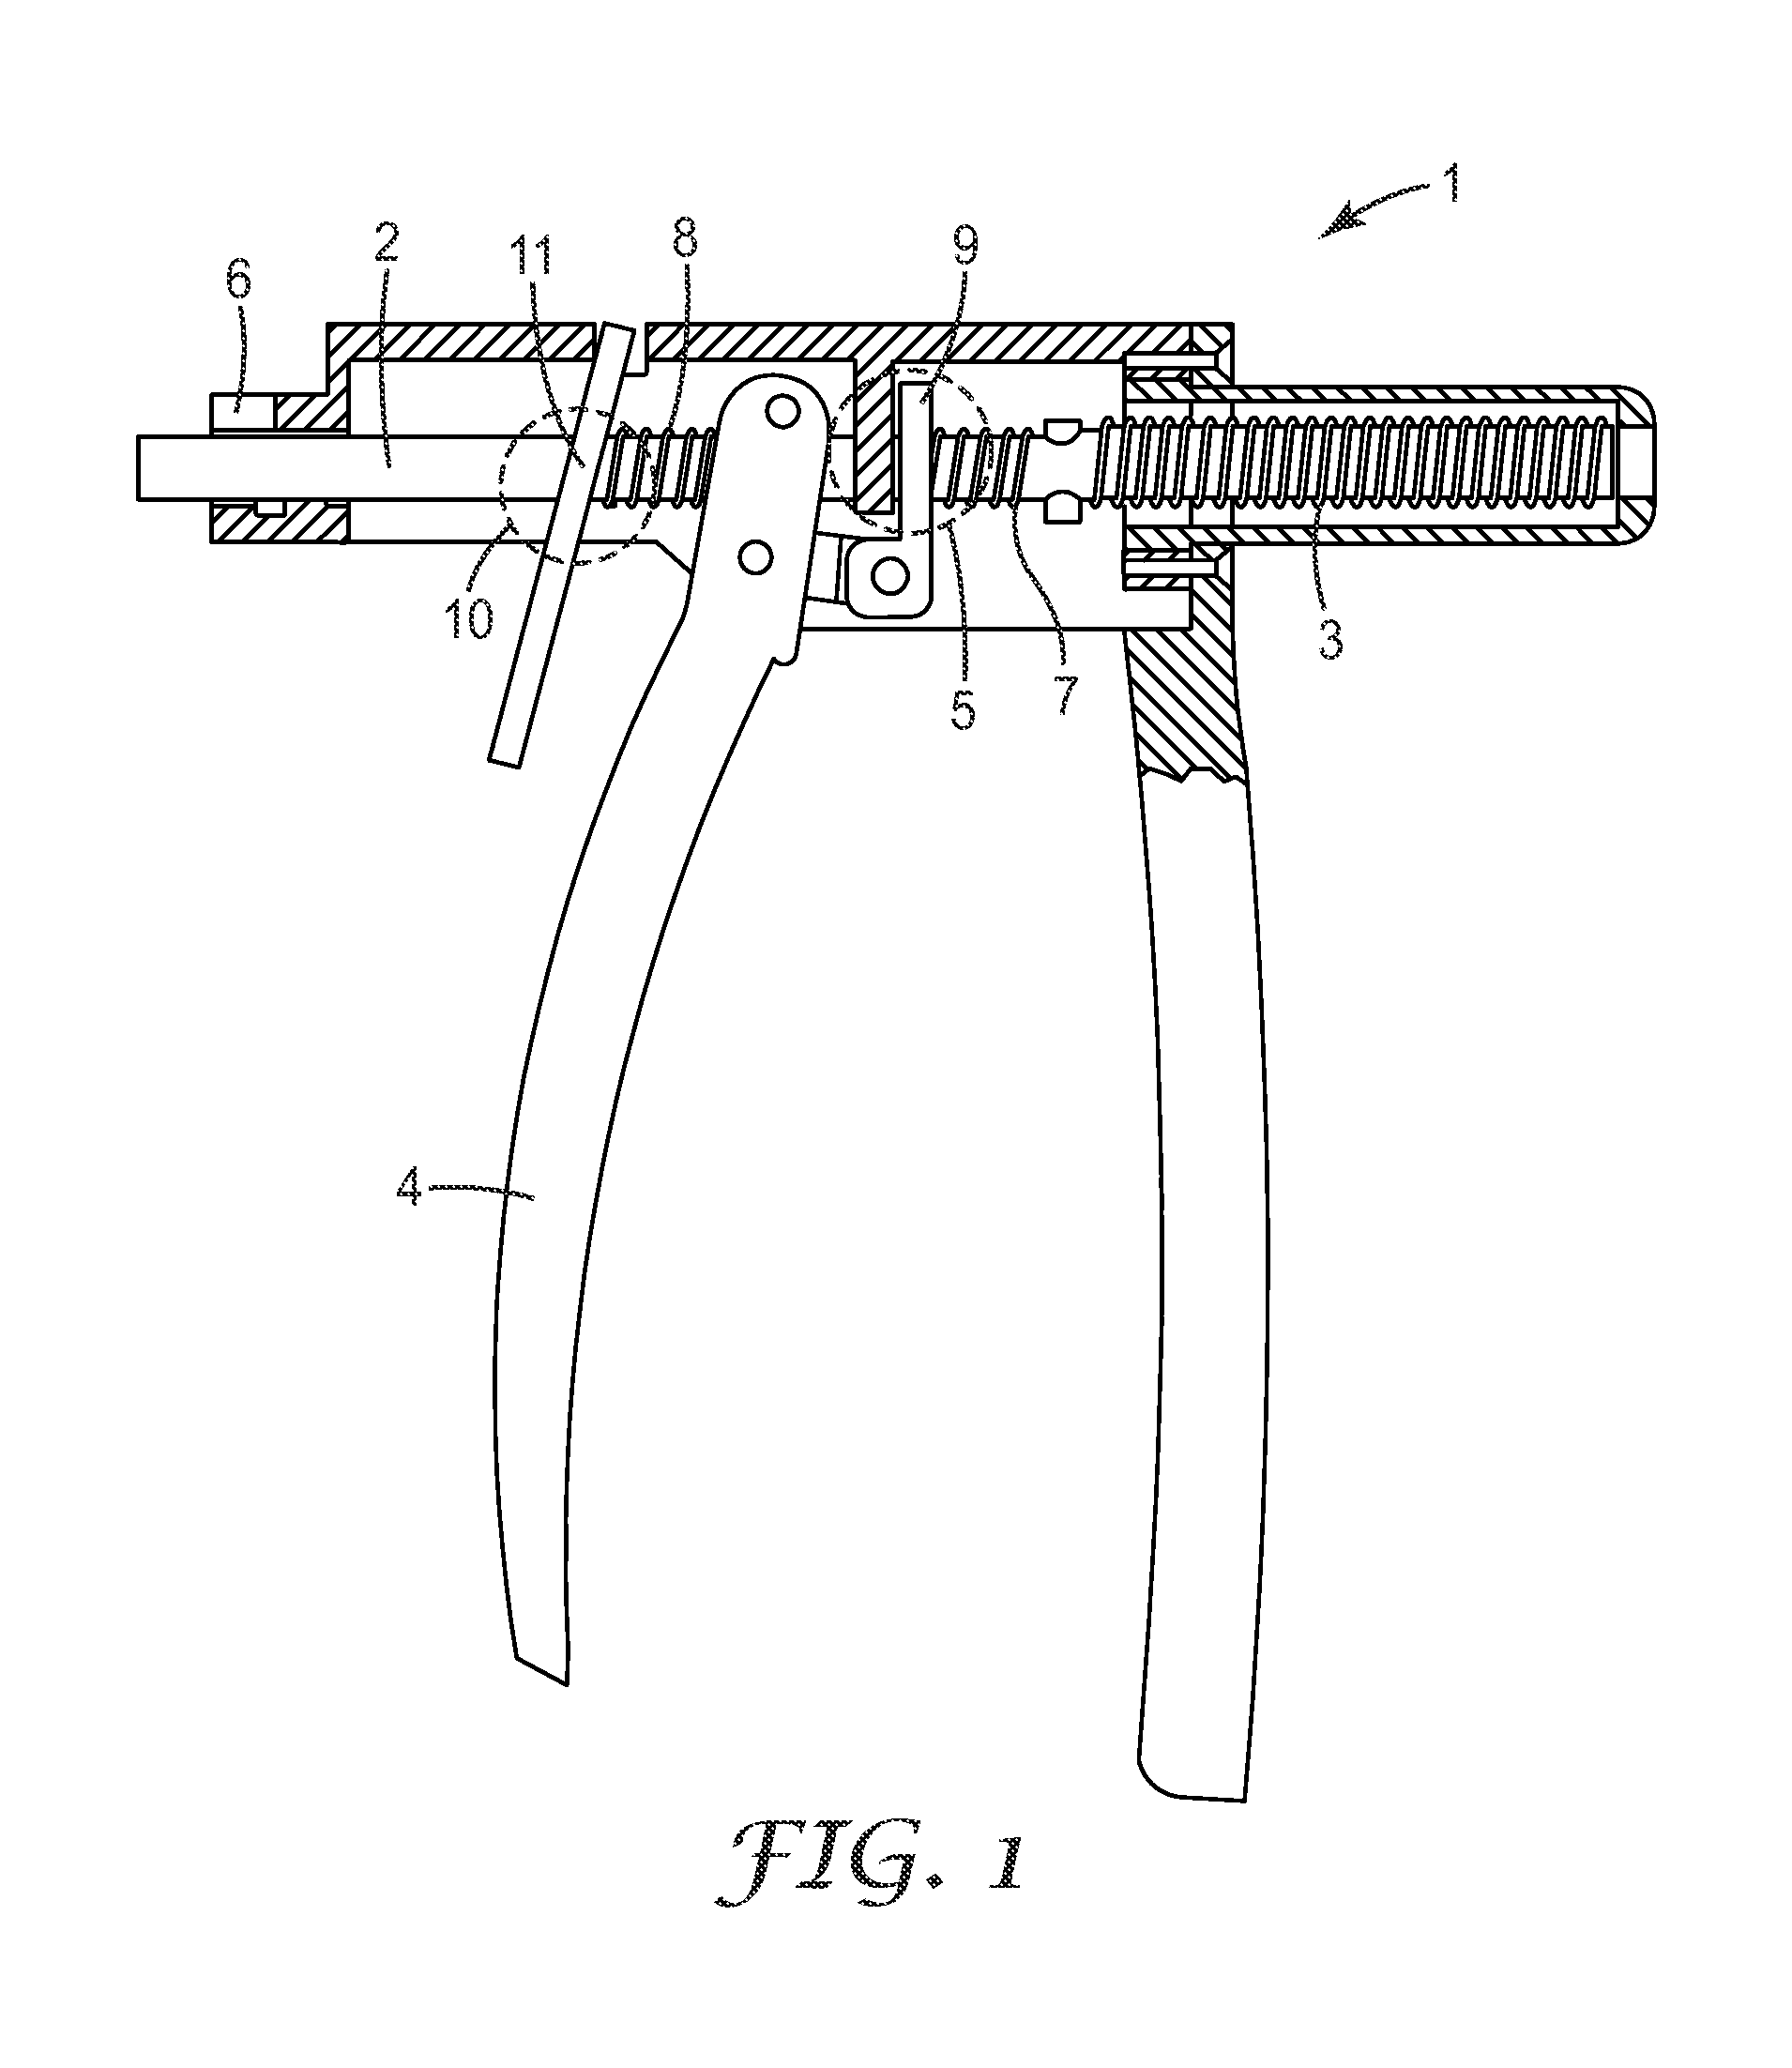 Device for dispensing a dental composition